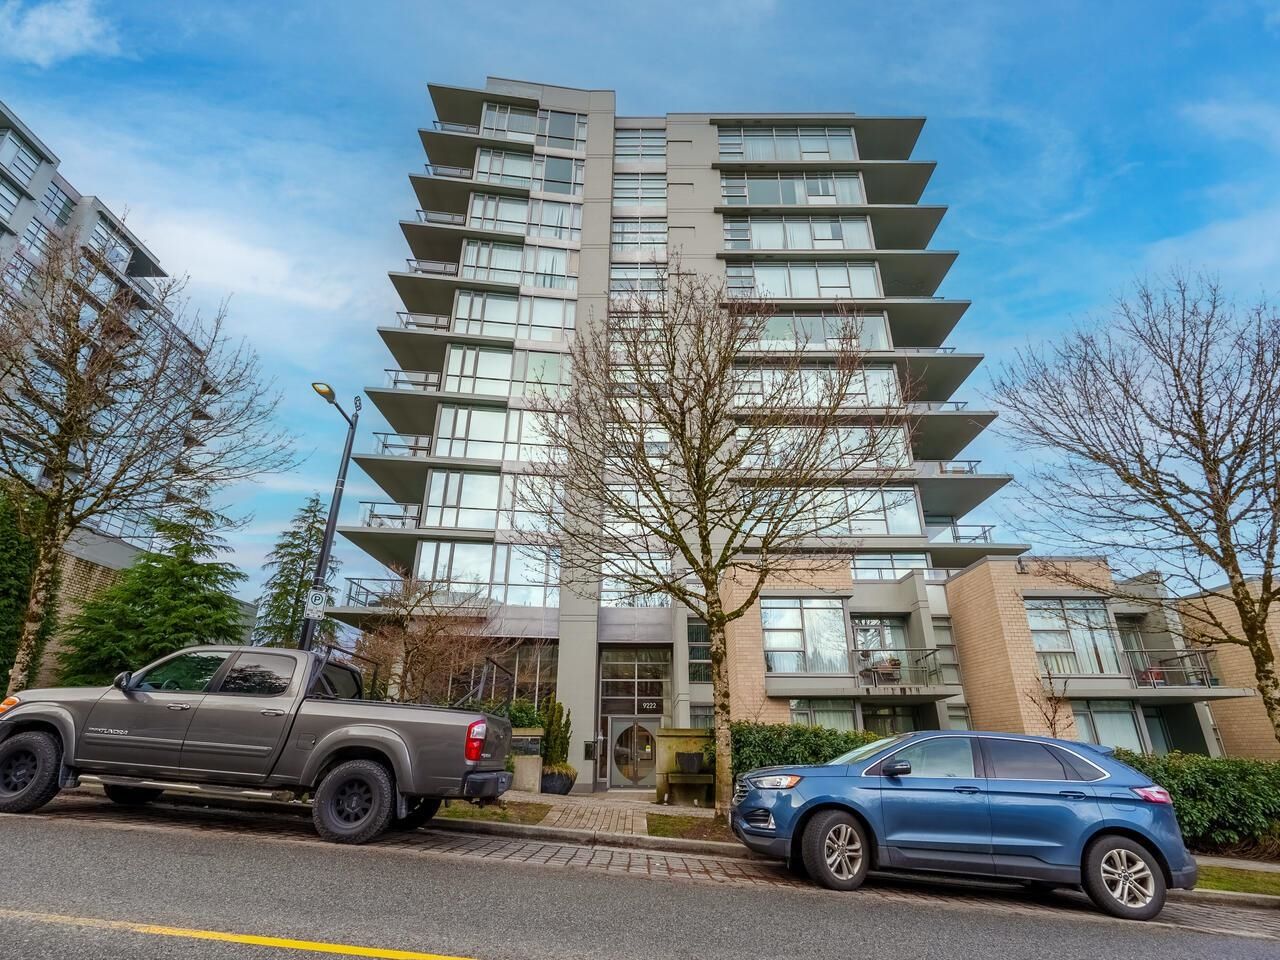 New property listed in Simon Fraser Univer., Burnaby North